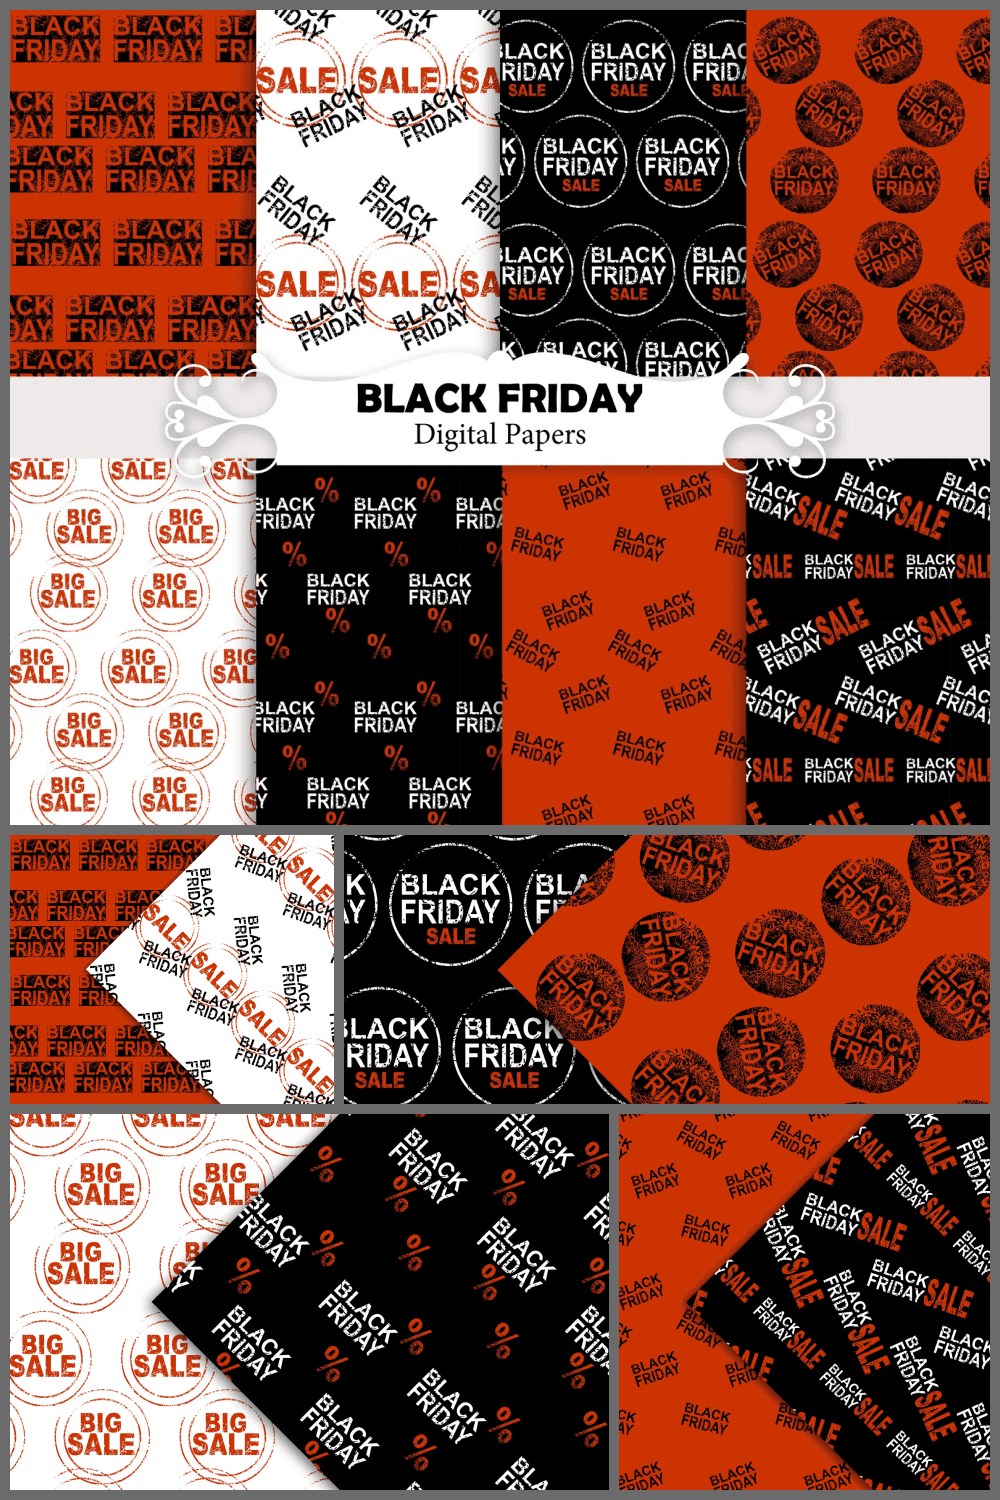 Black Friday Sales Paper with Black, Red, White Backgrounds.